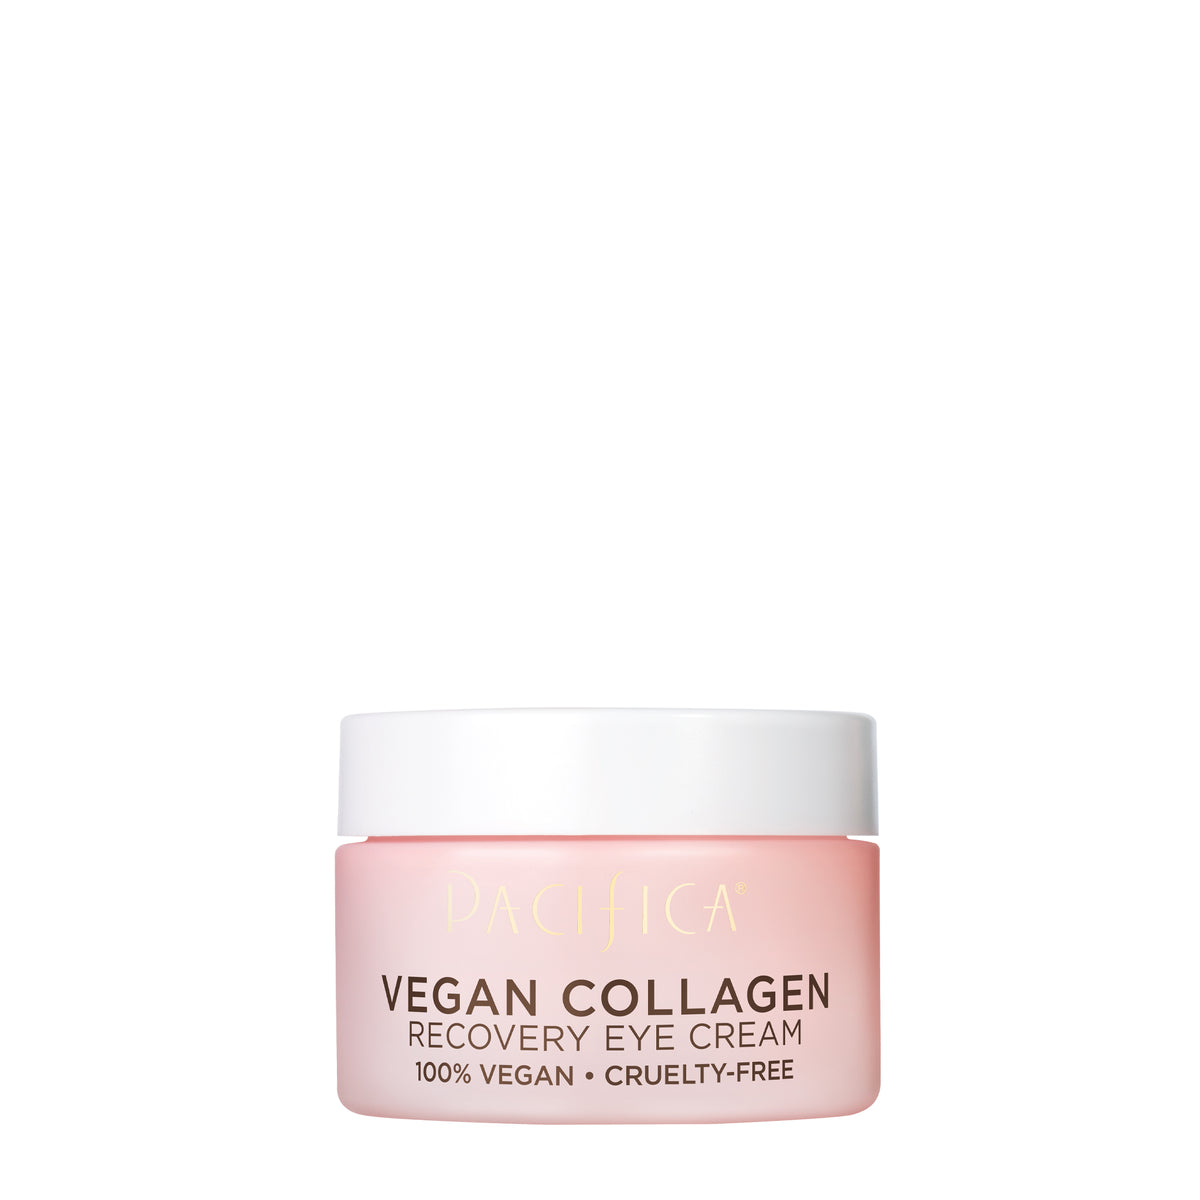 Vegan Collagen Recovery Eye Cream - Skin Care - Pacifica Beauty